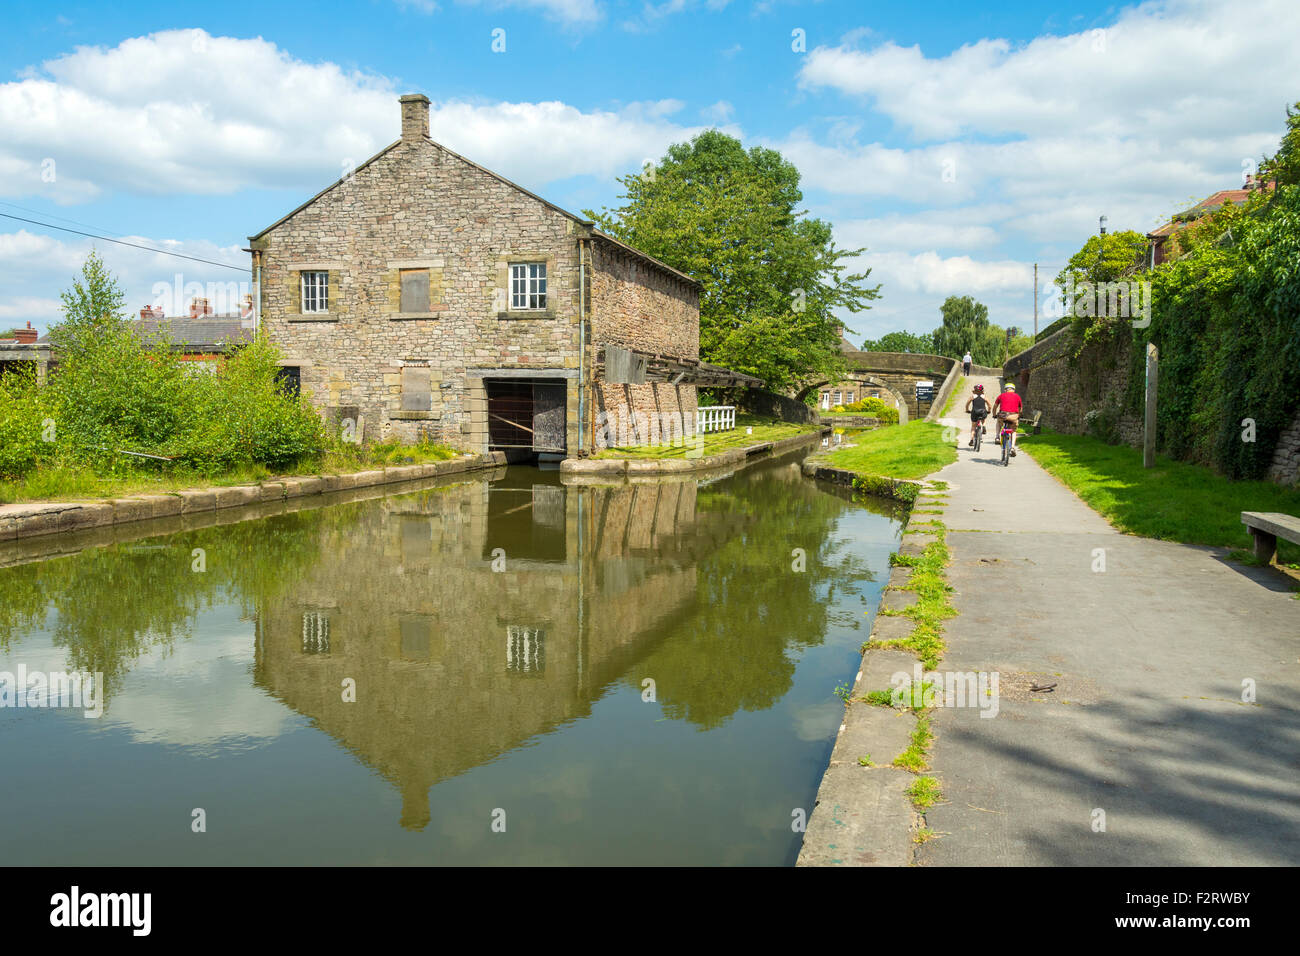 Former canal warehouse on the Macclesfield canal at Marple, Greater Manchester, England, UK. Stock Photo